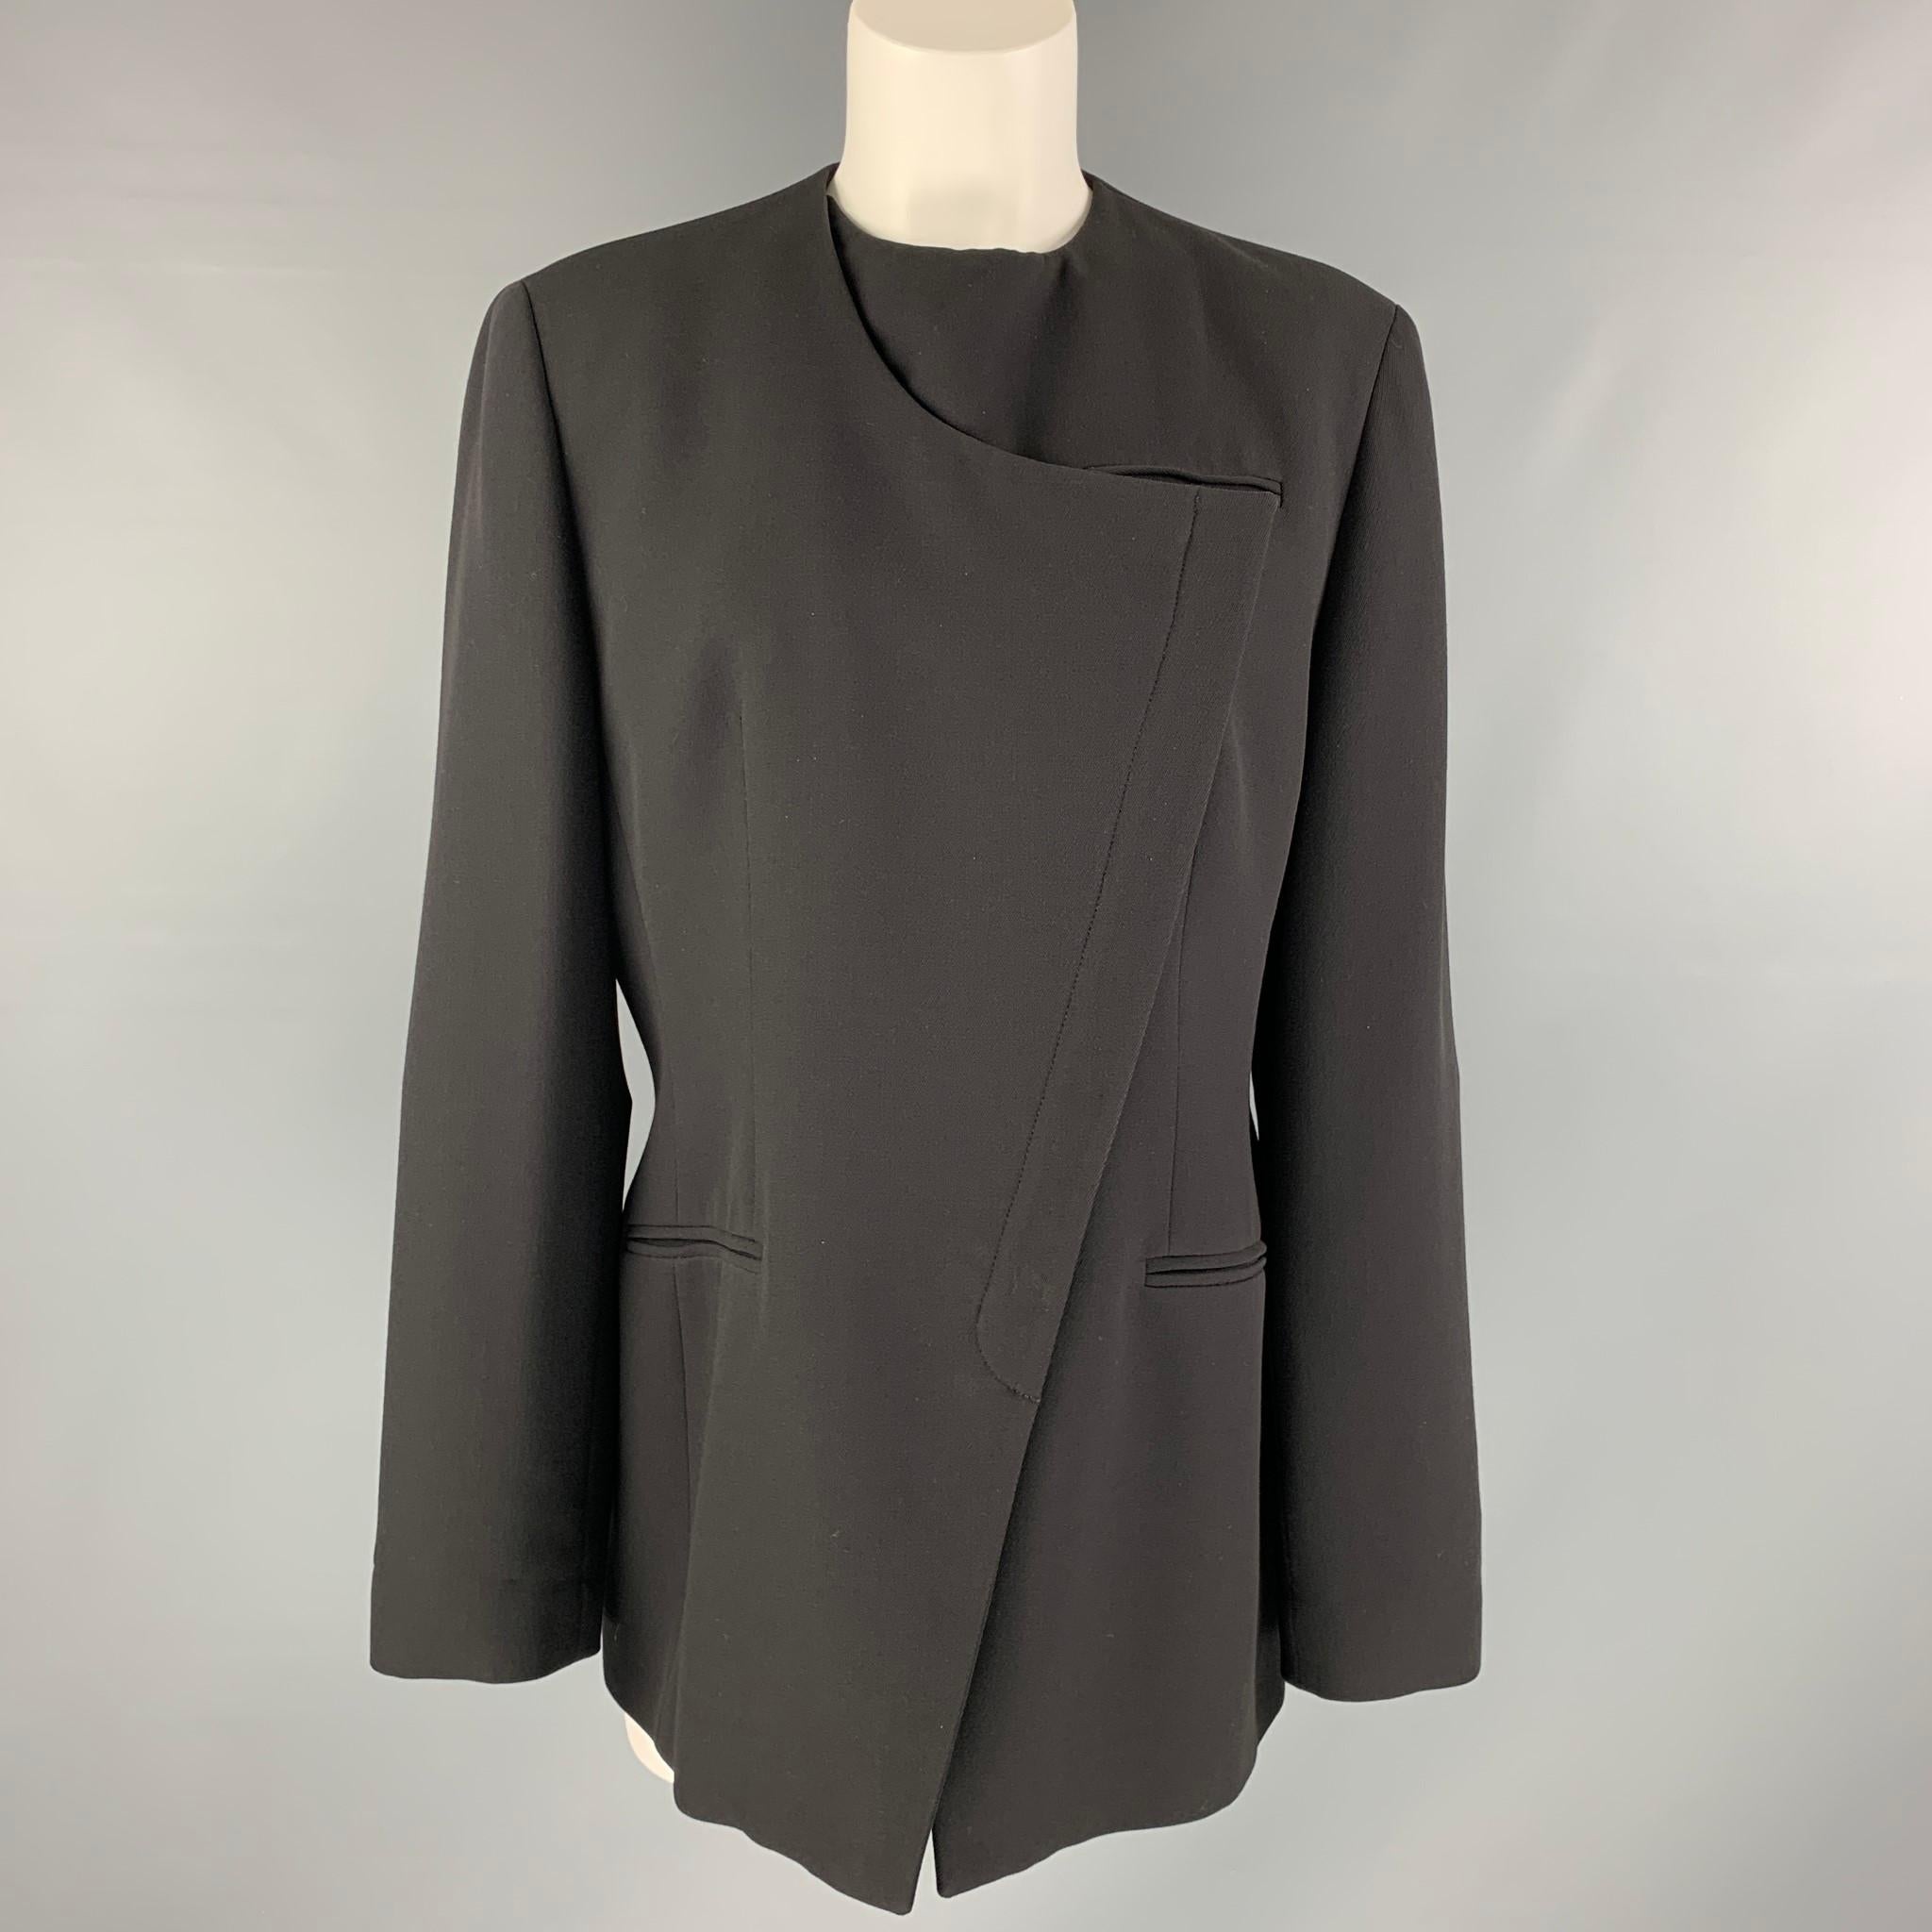 GIORGIO ARMANI 'A MILANO- BORGONUOVO 21' jacket comes in black wool fabric, no collar, zip up closure, lined, shoulder pads and three welt pockets. Made in Italy.

Excellent Pre-Owned Condition.
Marked: M

Measurements:

Shoulder: 16.5 in.
Bust: 41